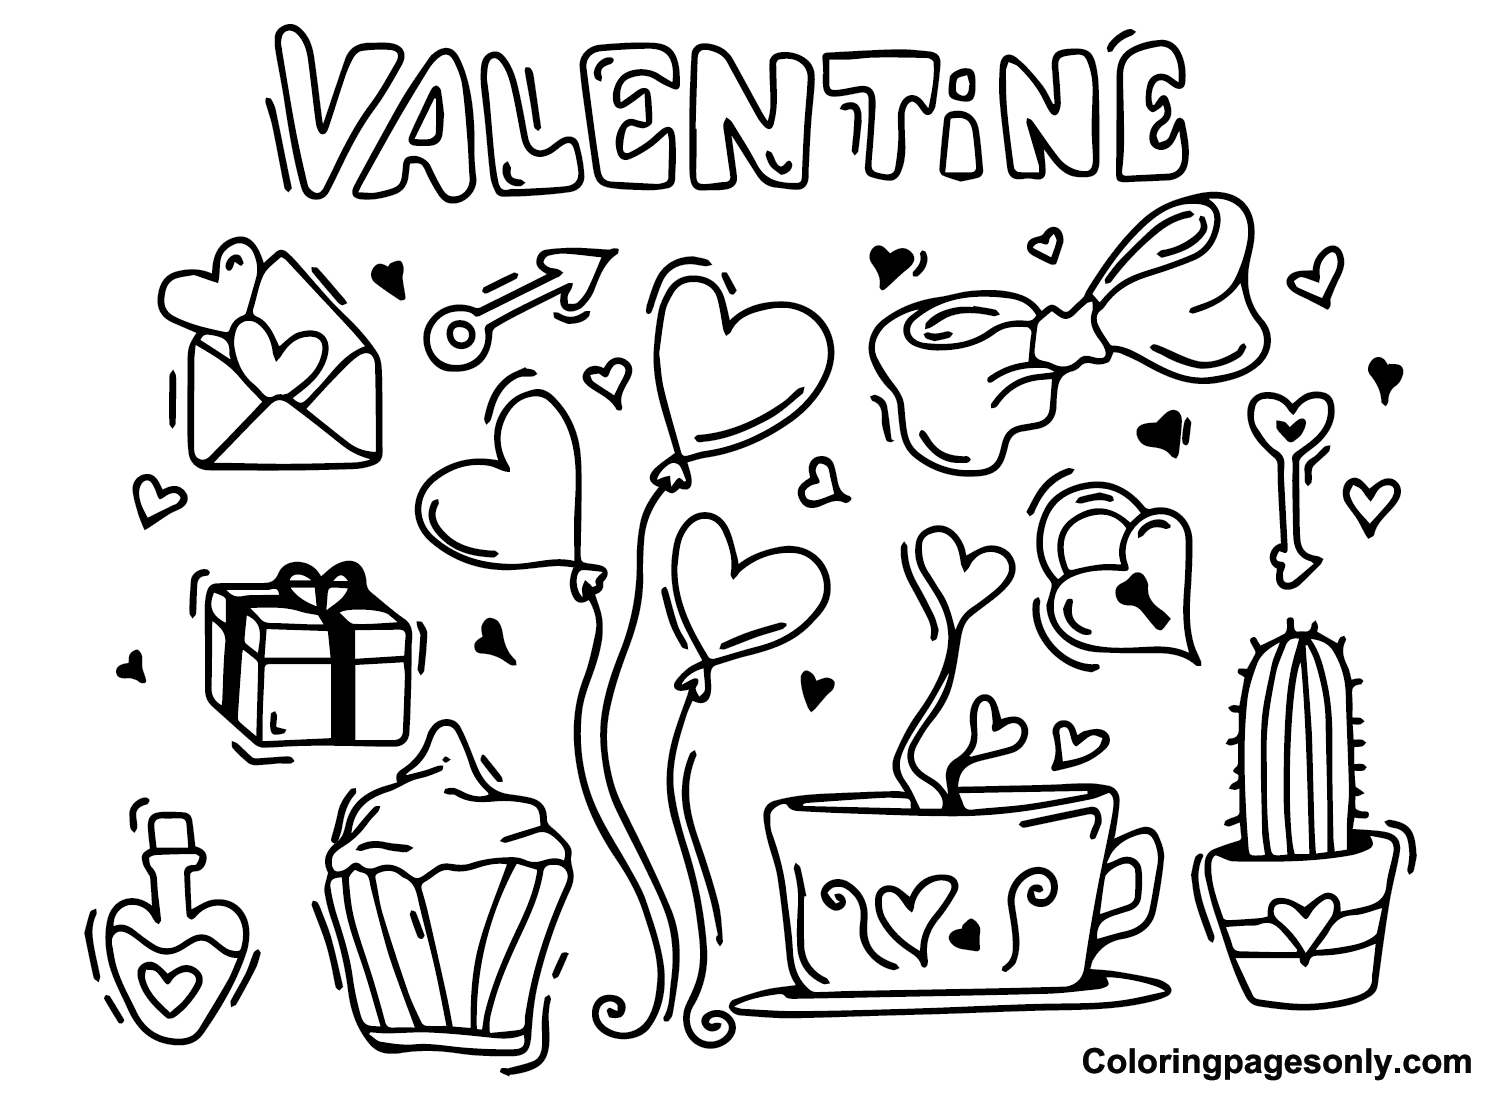 Valentines Day Card Ideas Coloring Page